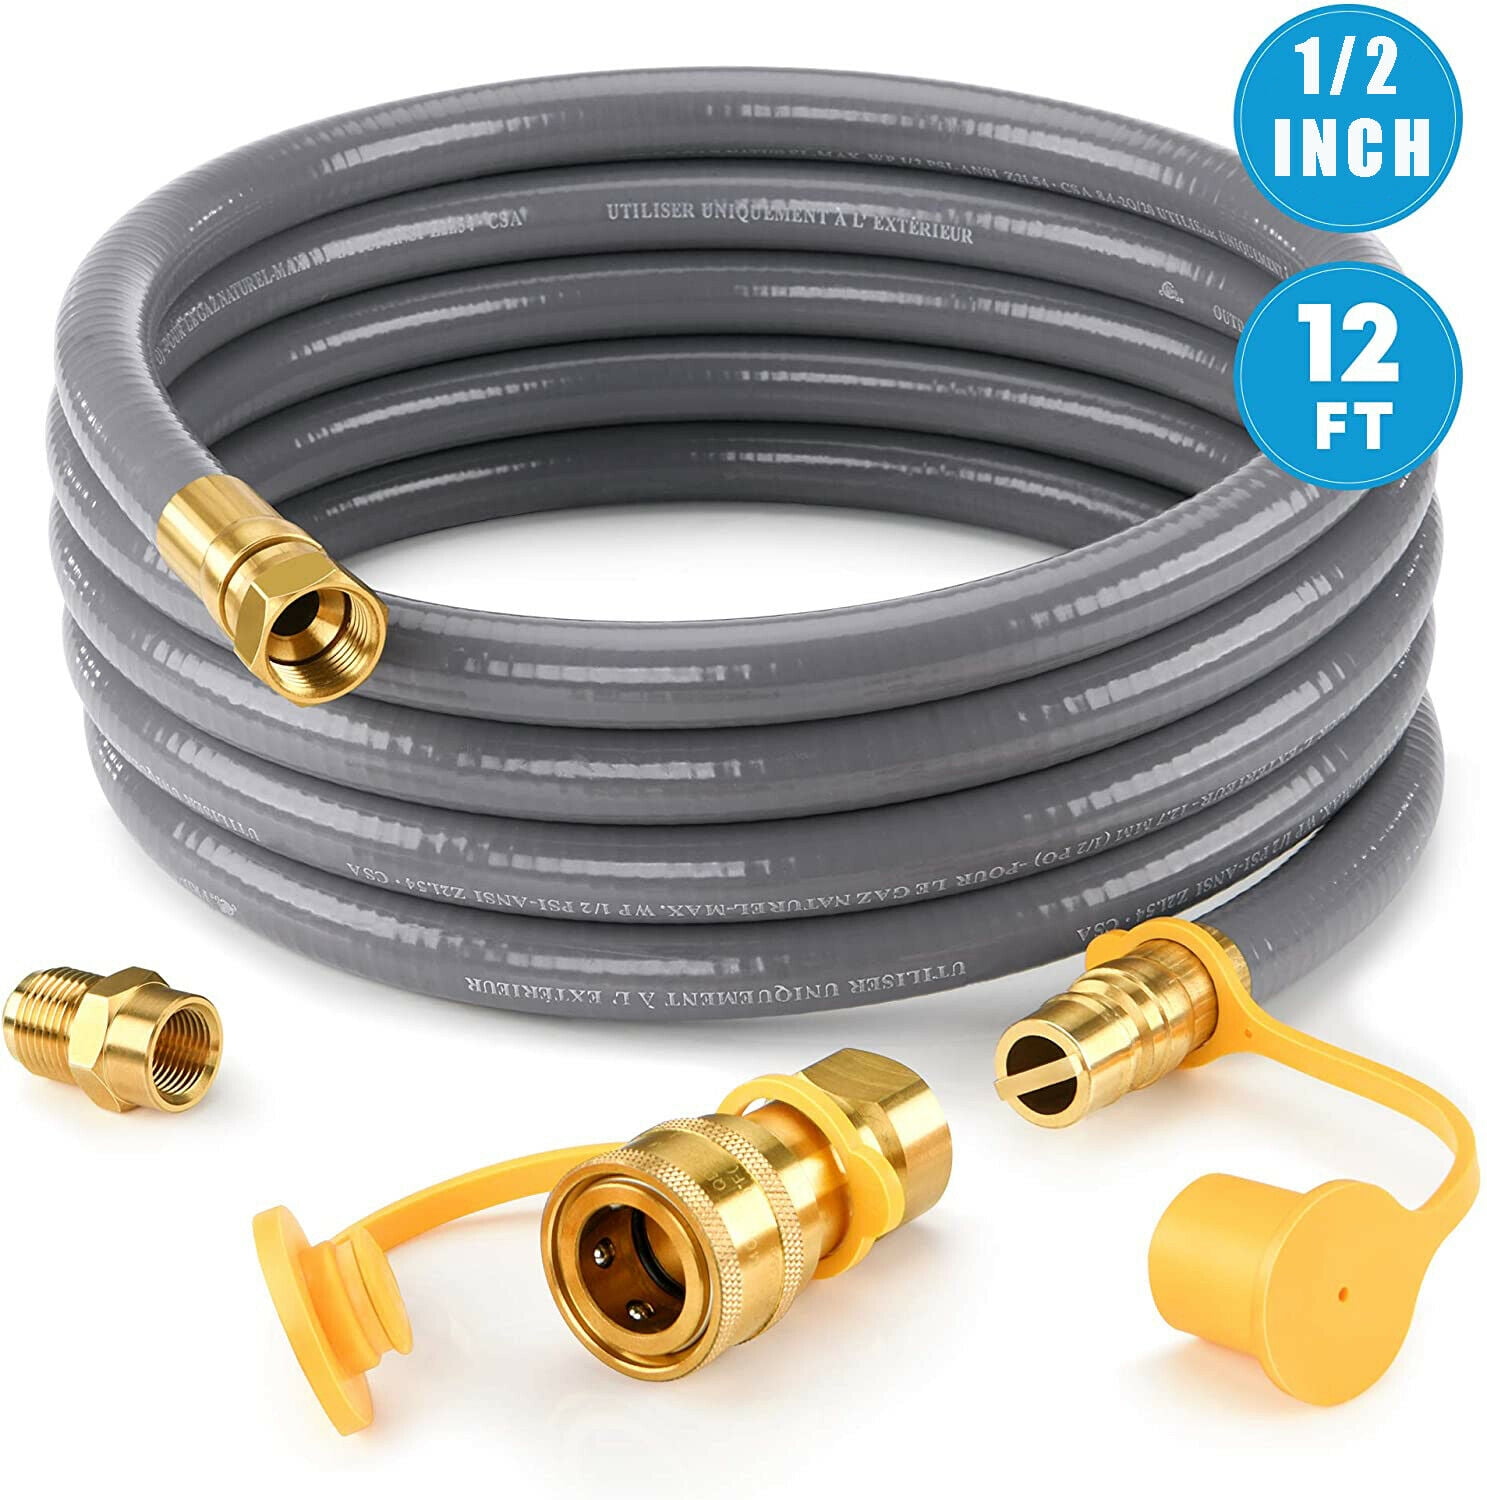 12 Feet 3/8 inch ID Natural Gas Grill Hose with Quick Connect for Low Pressure 